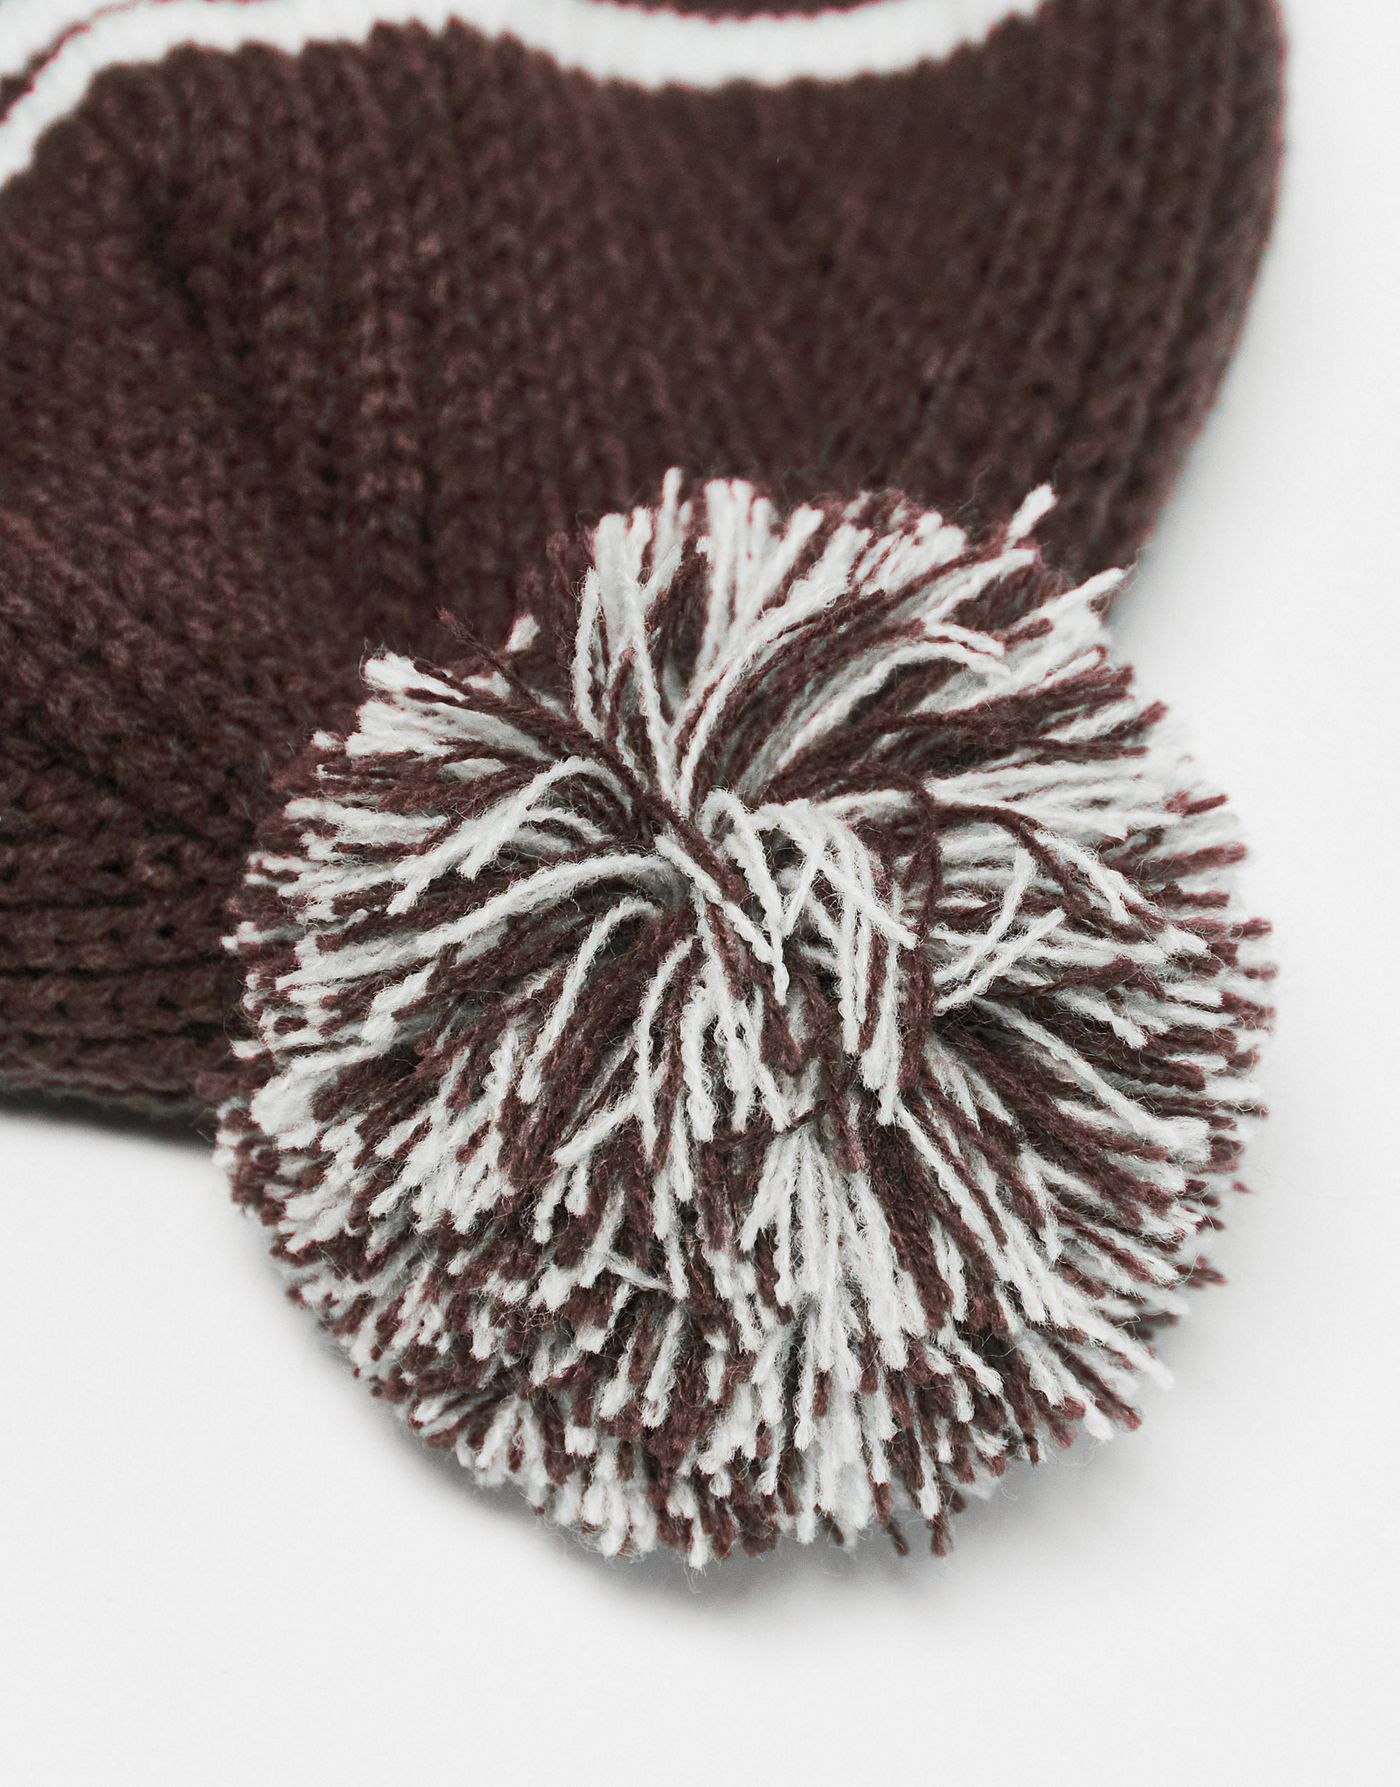 The North Face Retro bobble hat in brown and off white